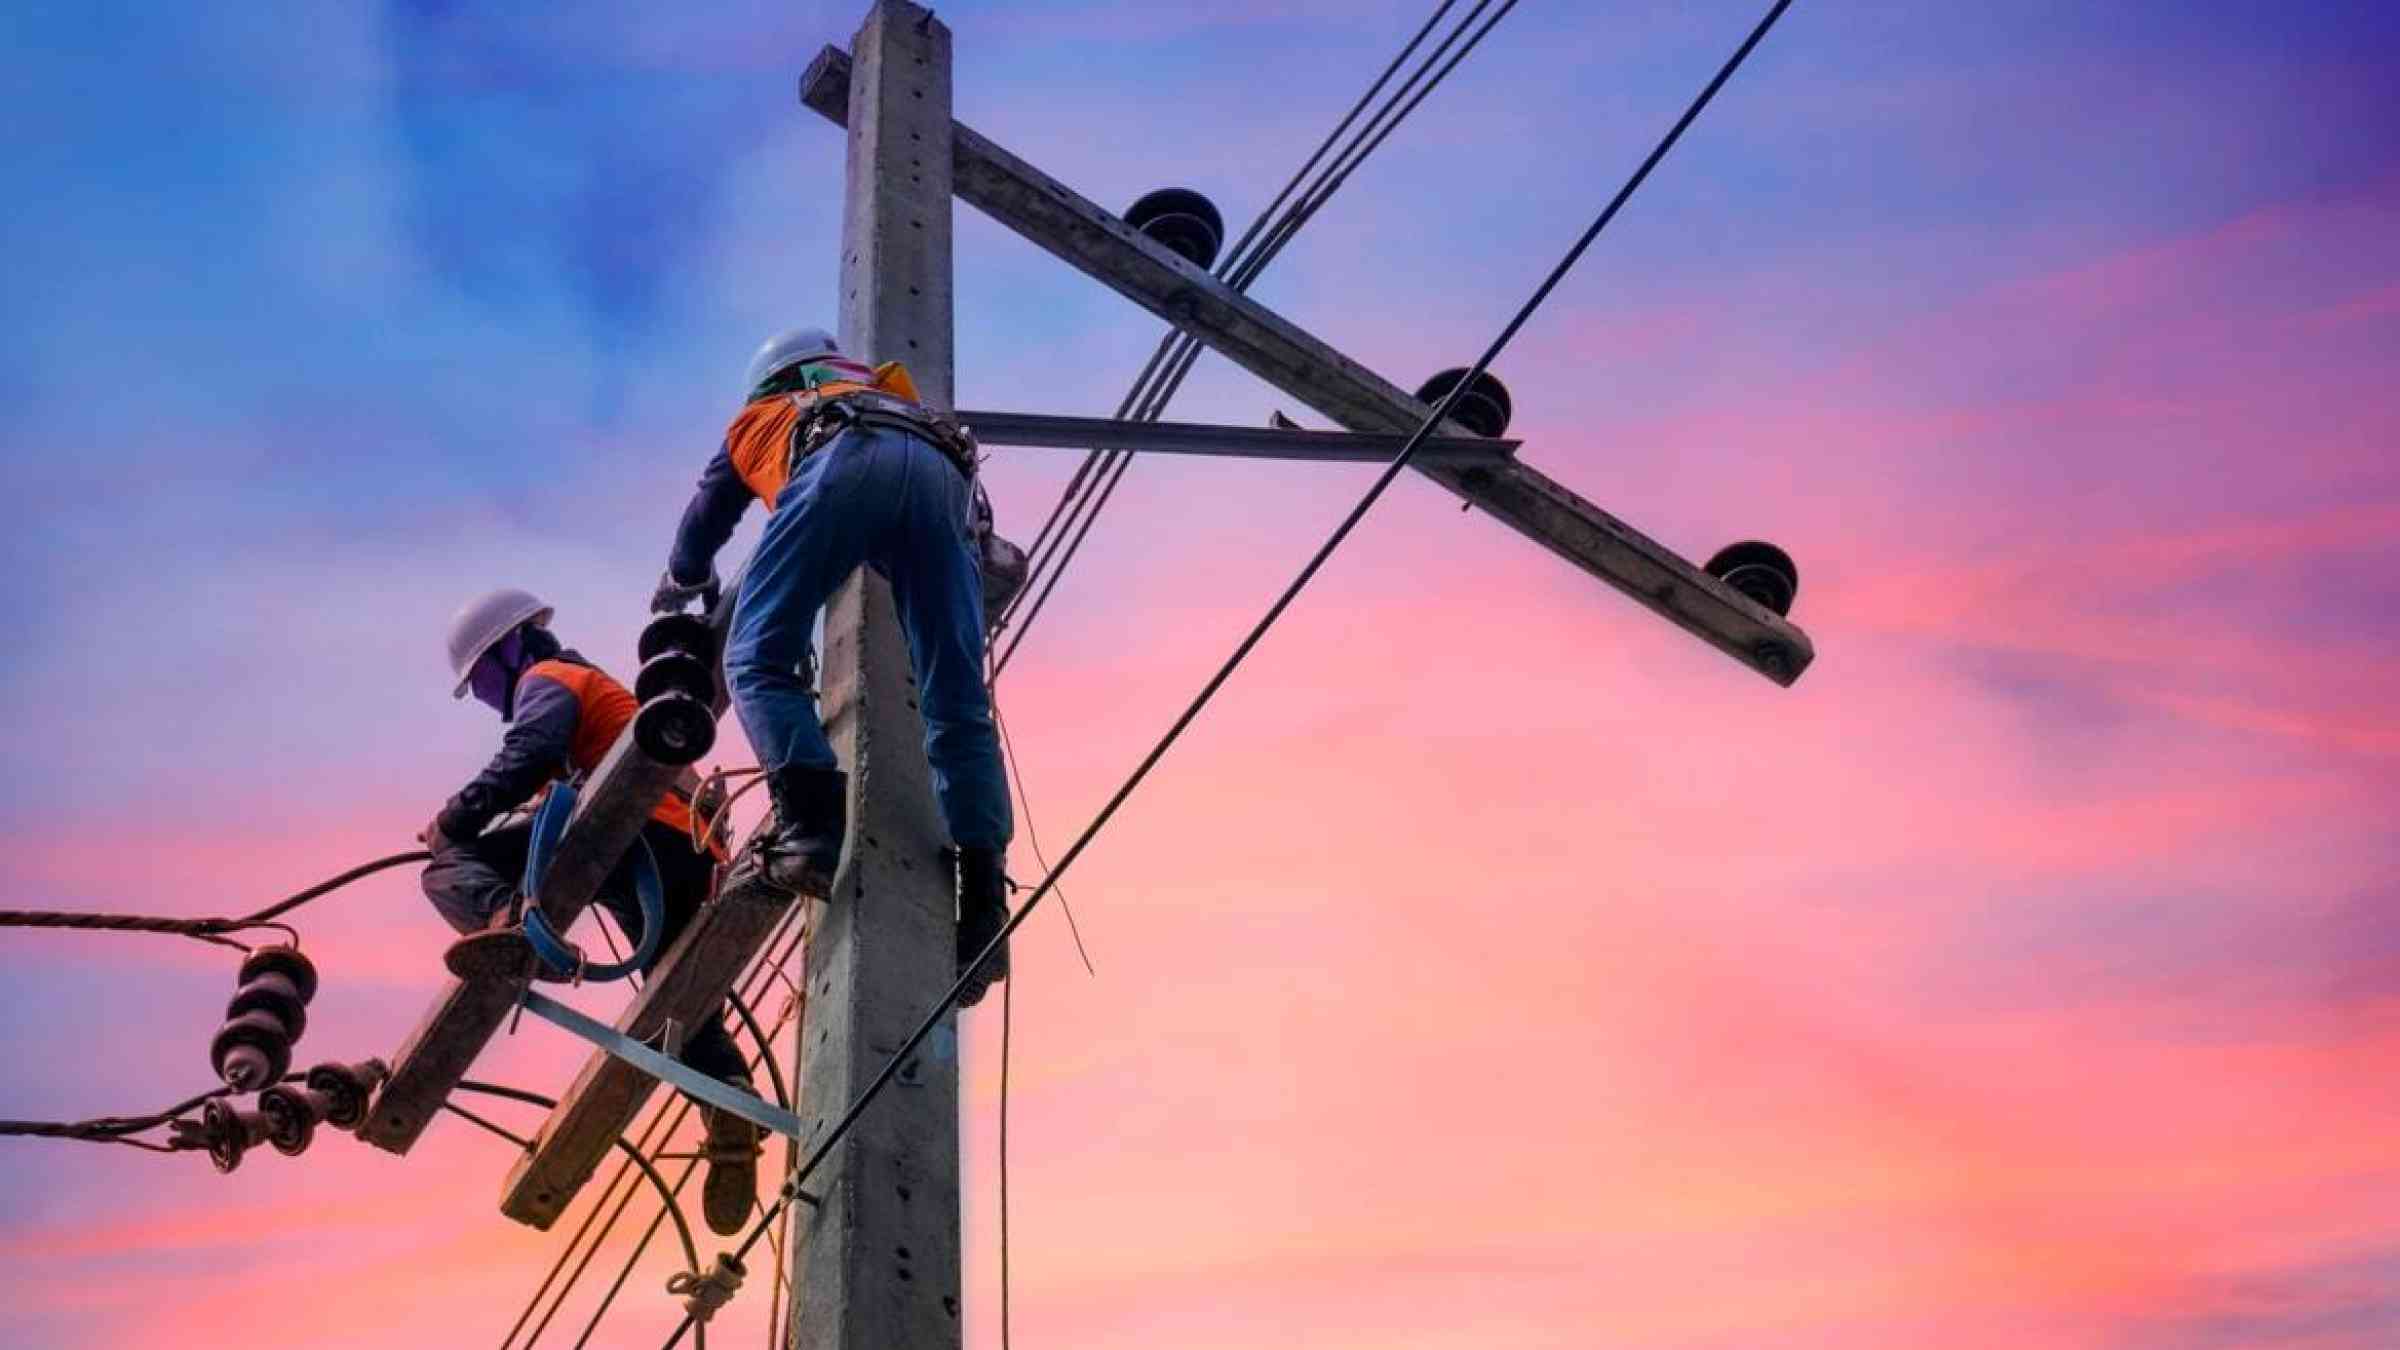 Electric line personnel conduct maintenance work on power lines